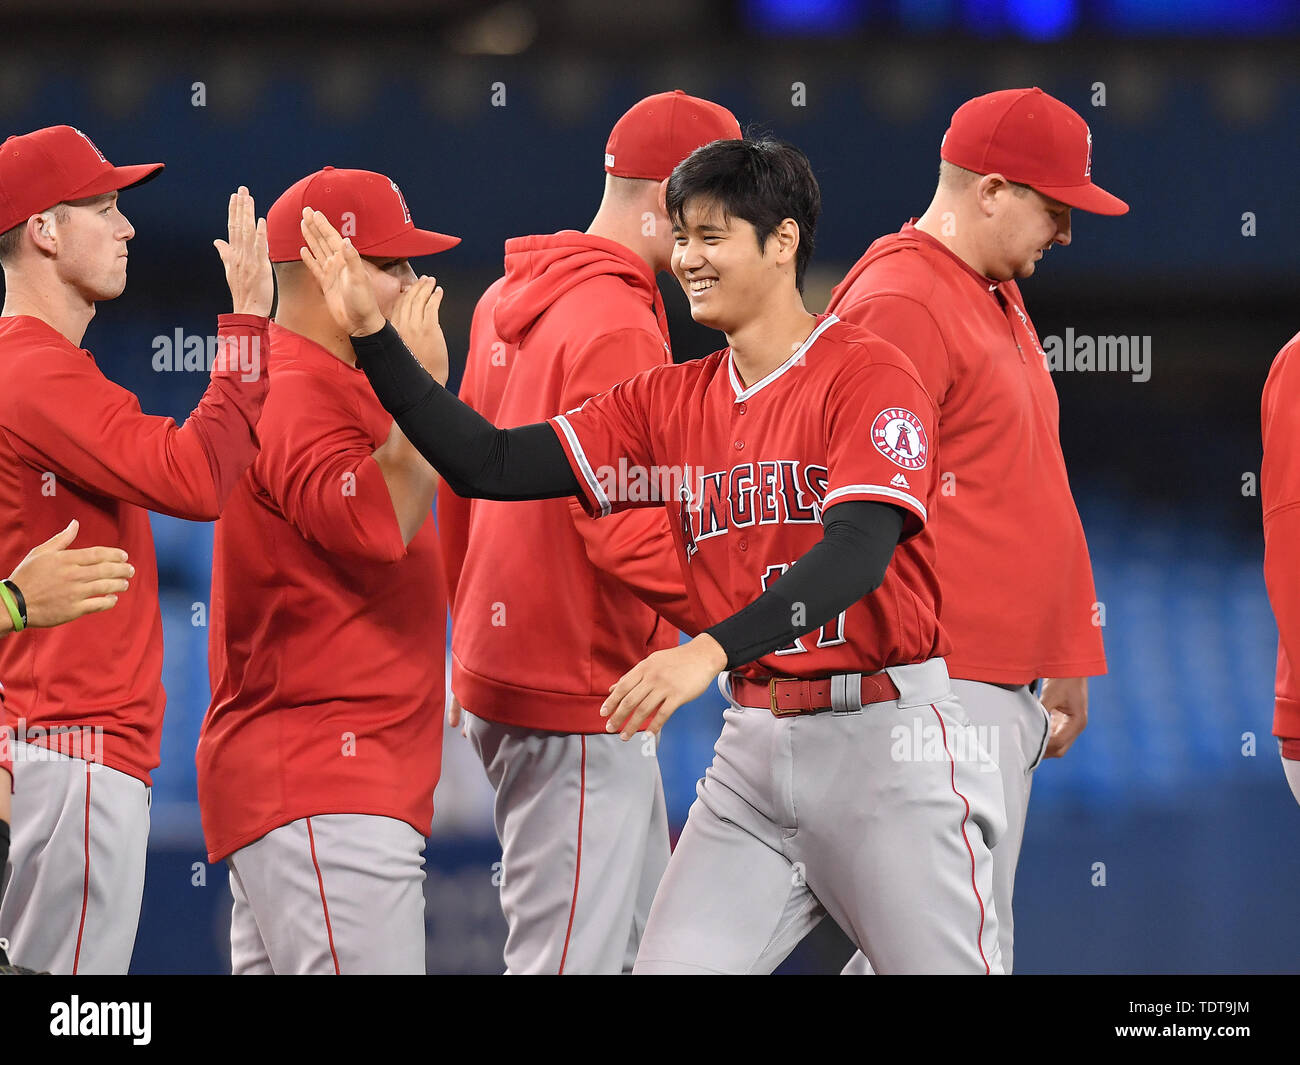 Toronto, Canada. 17th June, 2019. Los Angeles Angels' Shohei Ohtani (17) high fives his teammates after winning the Major League Baseball game against the Toronto Blue Jays at Rogers Centre in Toronto, Canada, June 17, 2019. Credit: AFLO/Alamy Live News Stock Photo